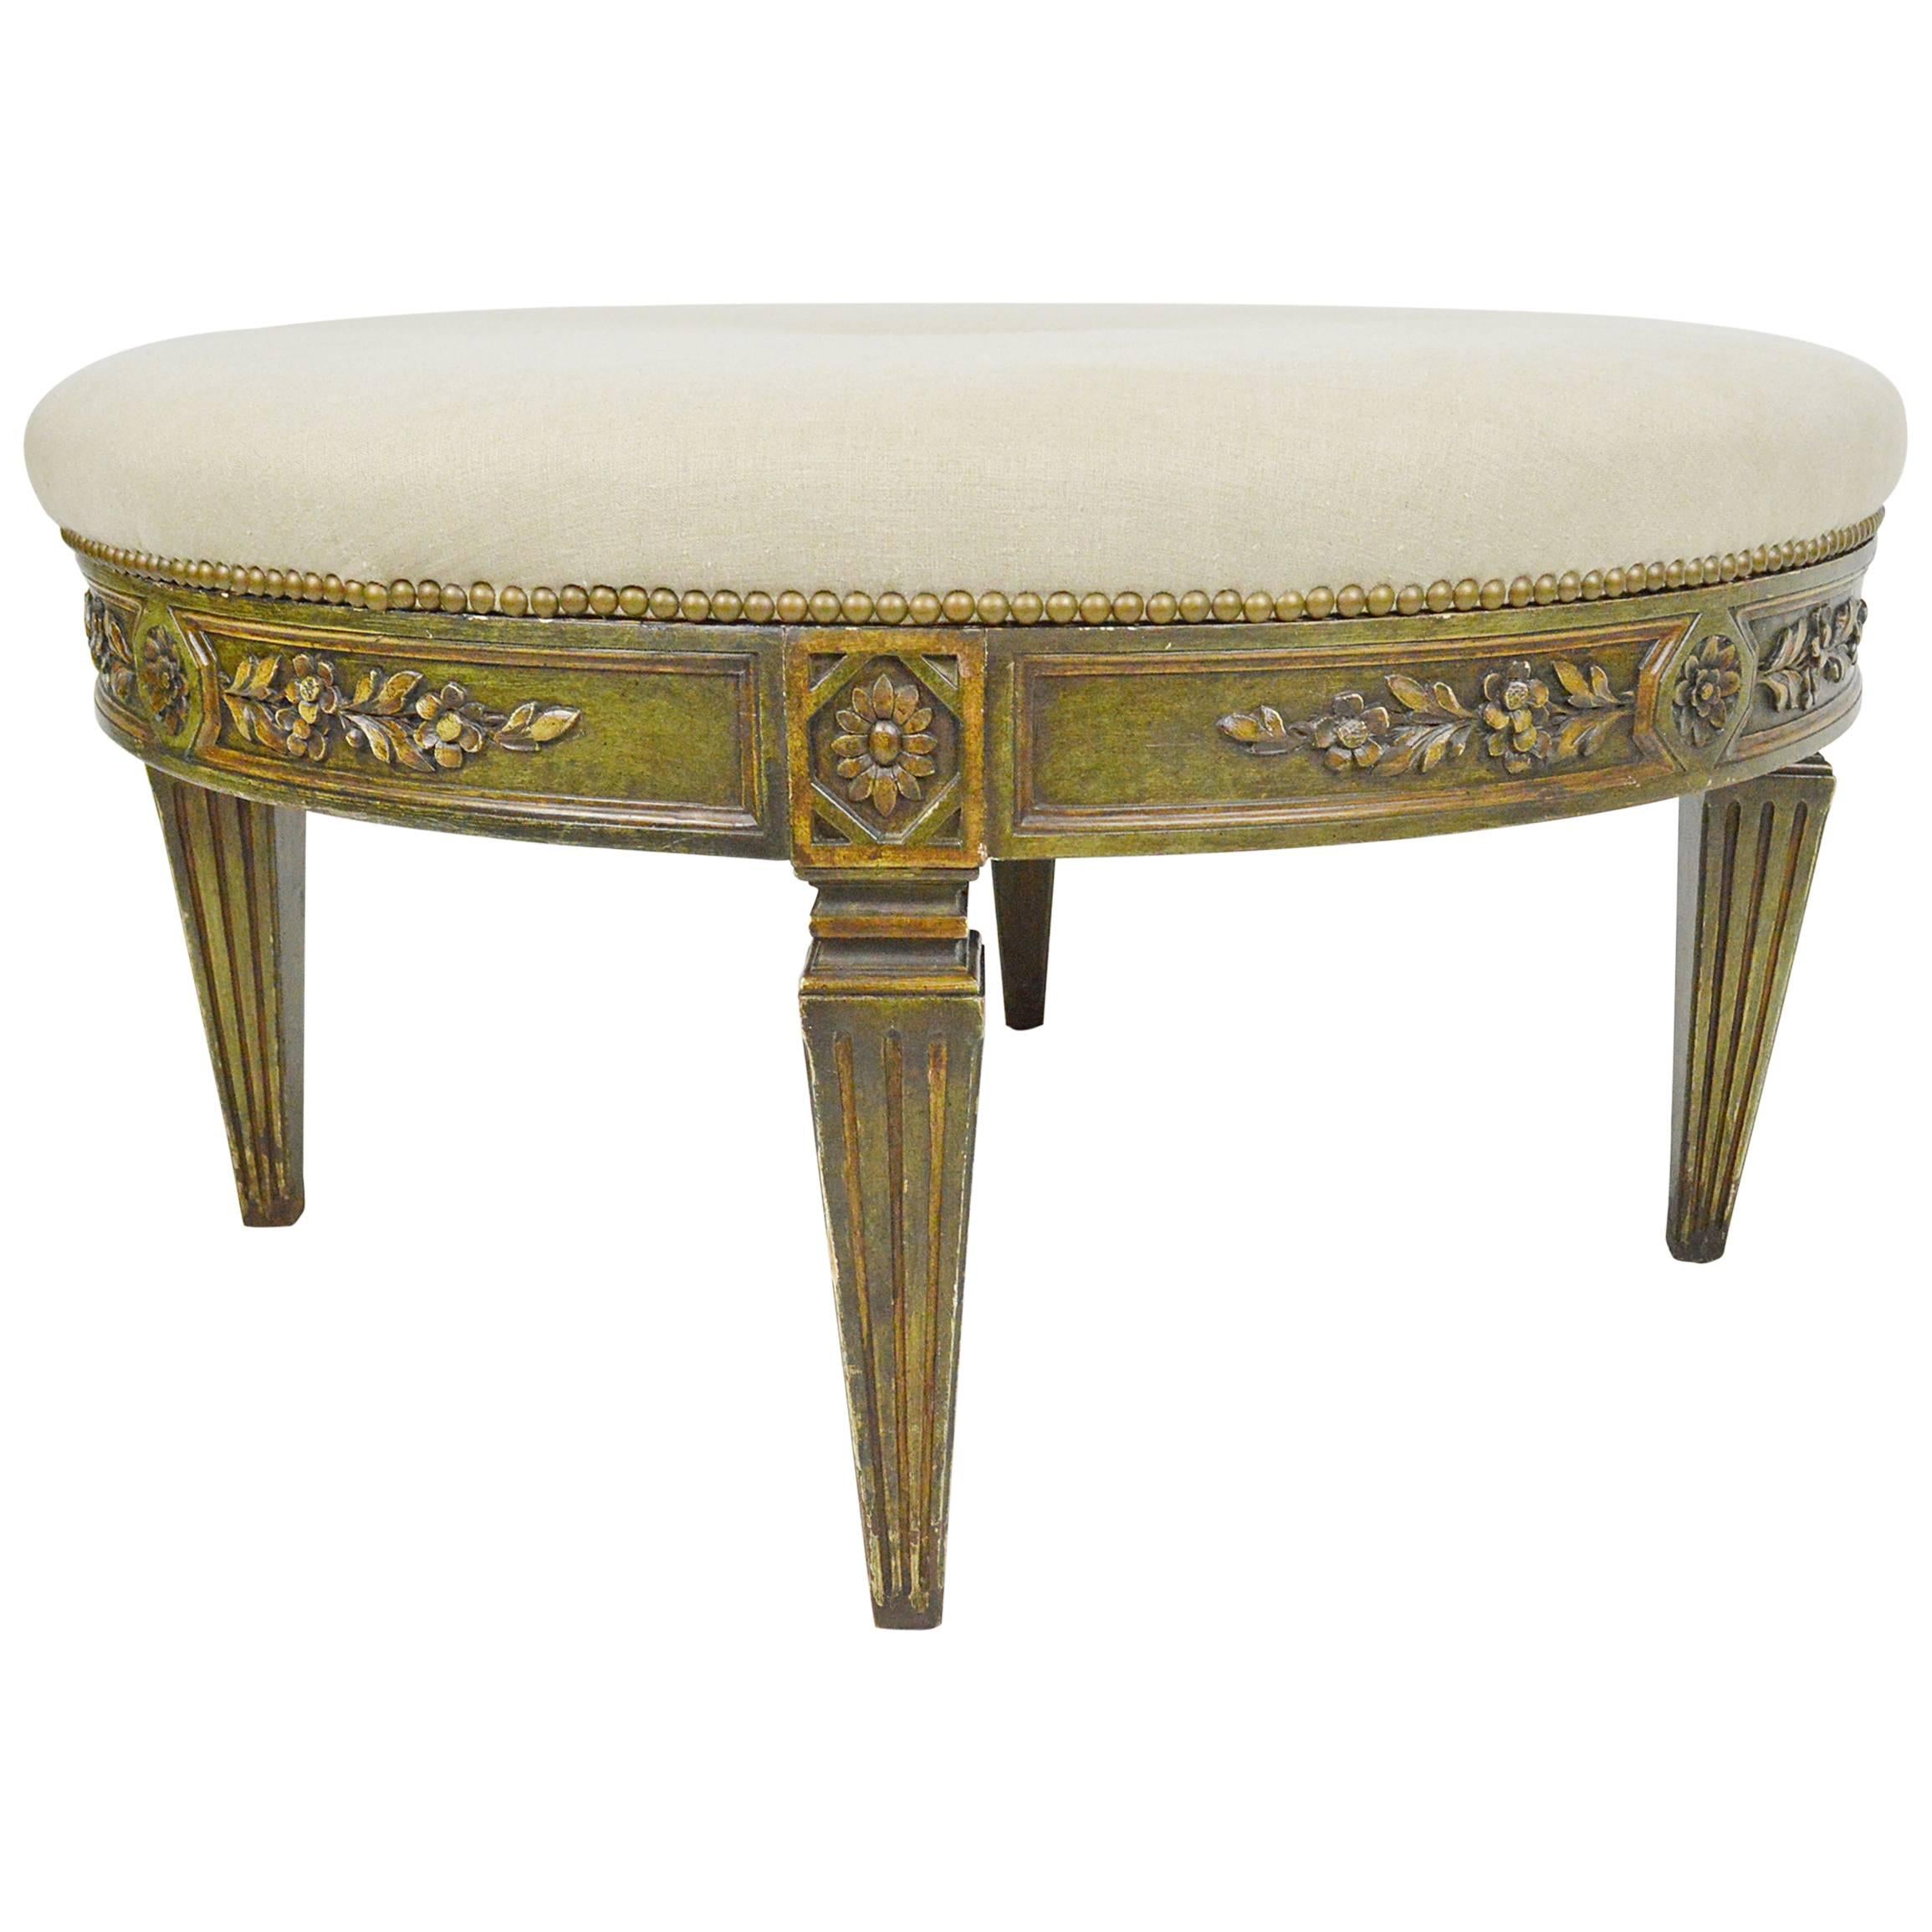 French Neoclassical Style Carved Wood and Painted Ottoman For Sale